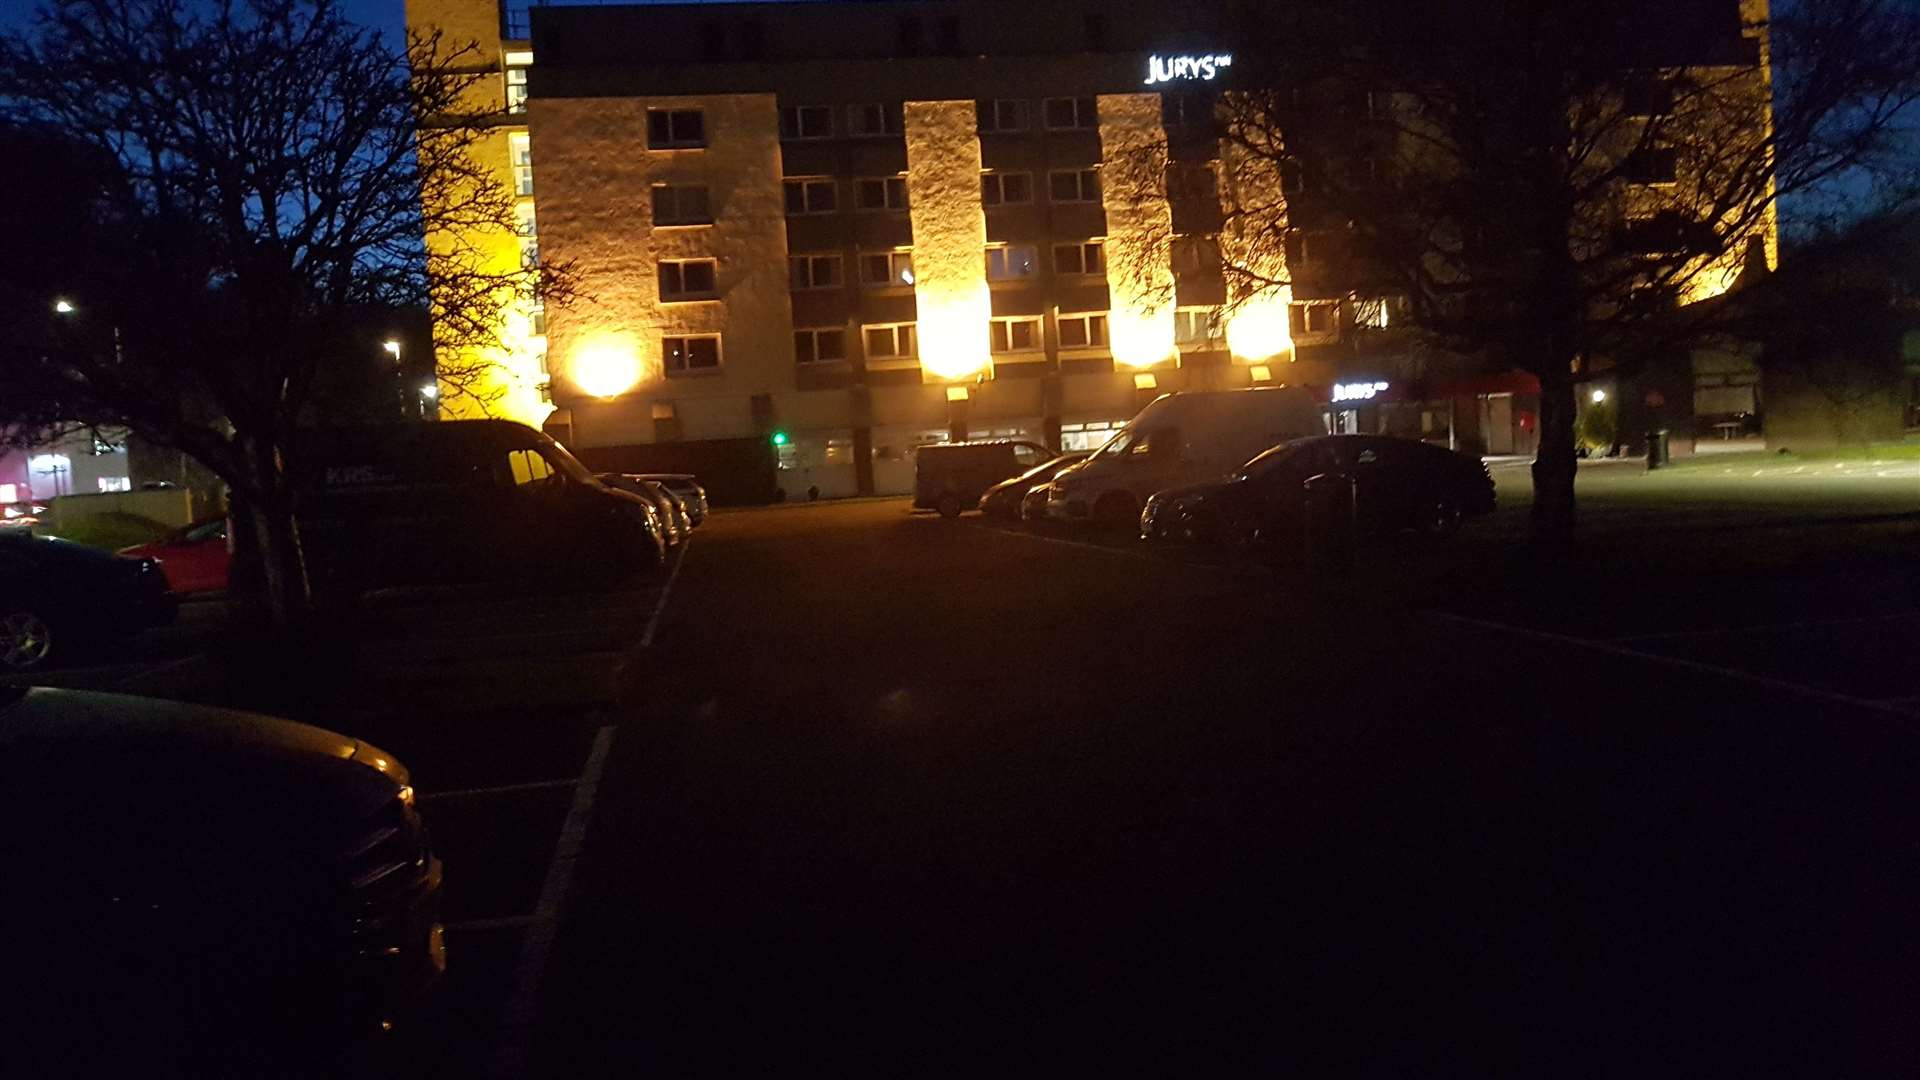 Concerns have been raised over the volume of cars in an 'essential workers' hotel.